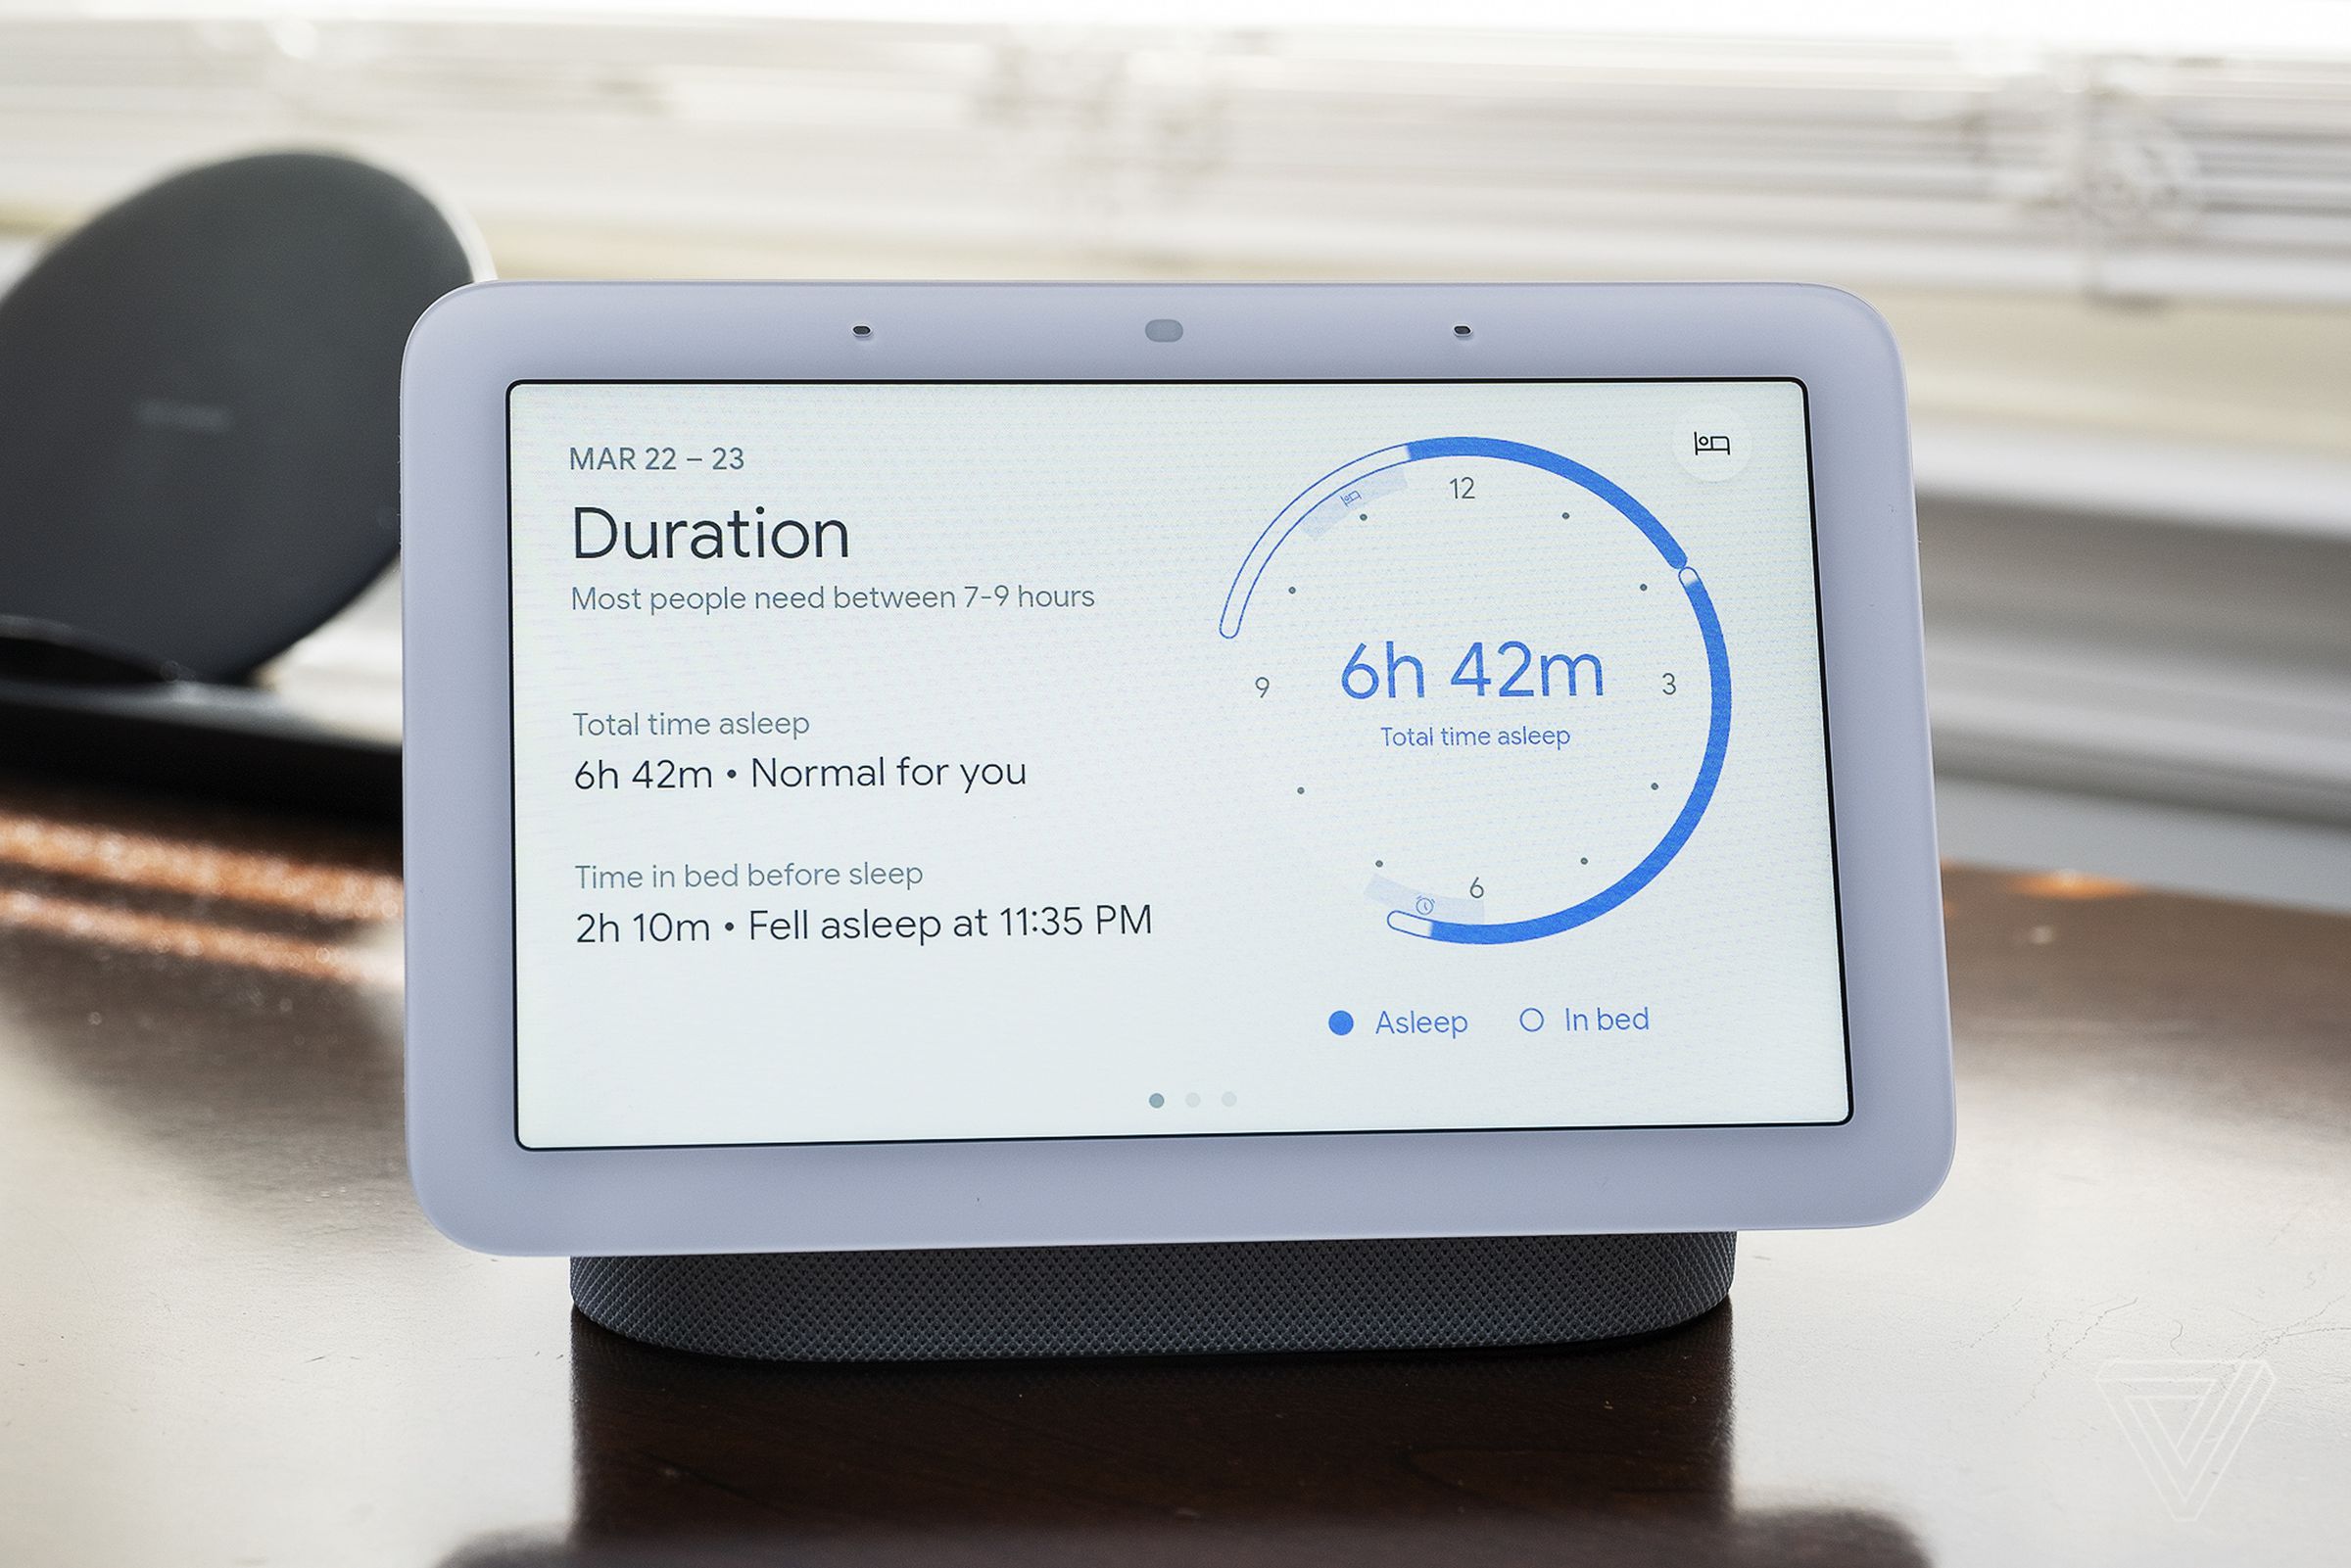 The Nest Hub can measure how long you’ve spent in bed and how much of that was spent sleeping.